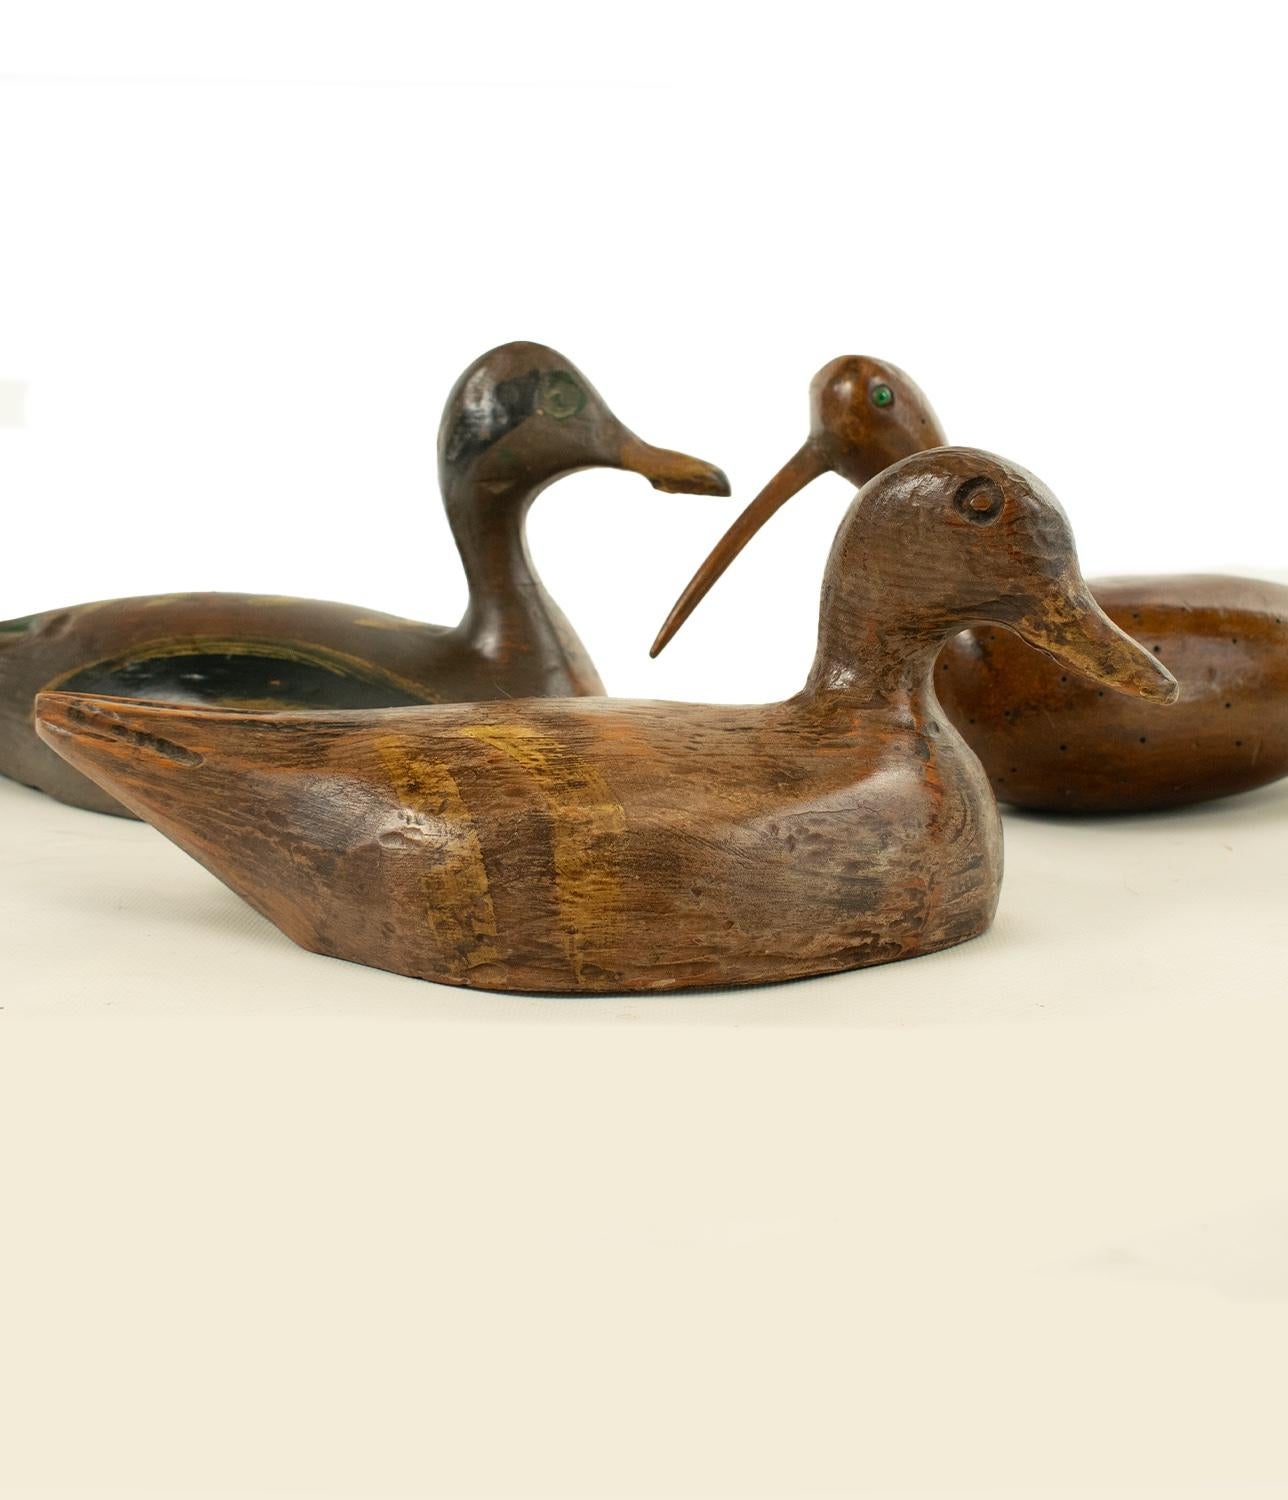 A trio of two Ducks and a Curlew - ancient decoys used for shooting. Naively carved and painted. The curlew with evidence of gun shot.

Hand carved and painted. Paint now faded but all to a lovely aged patina and showing the richness of the wood